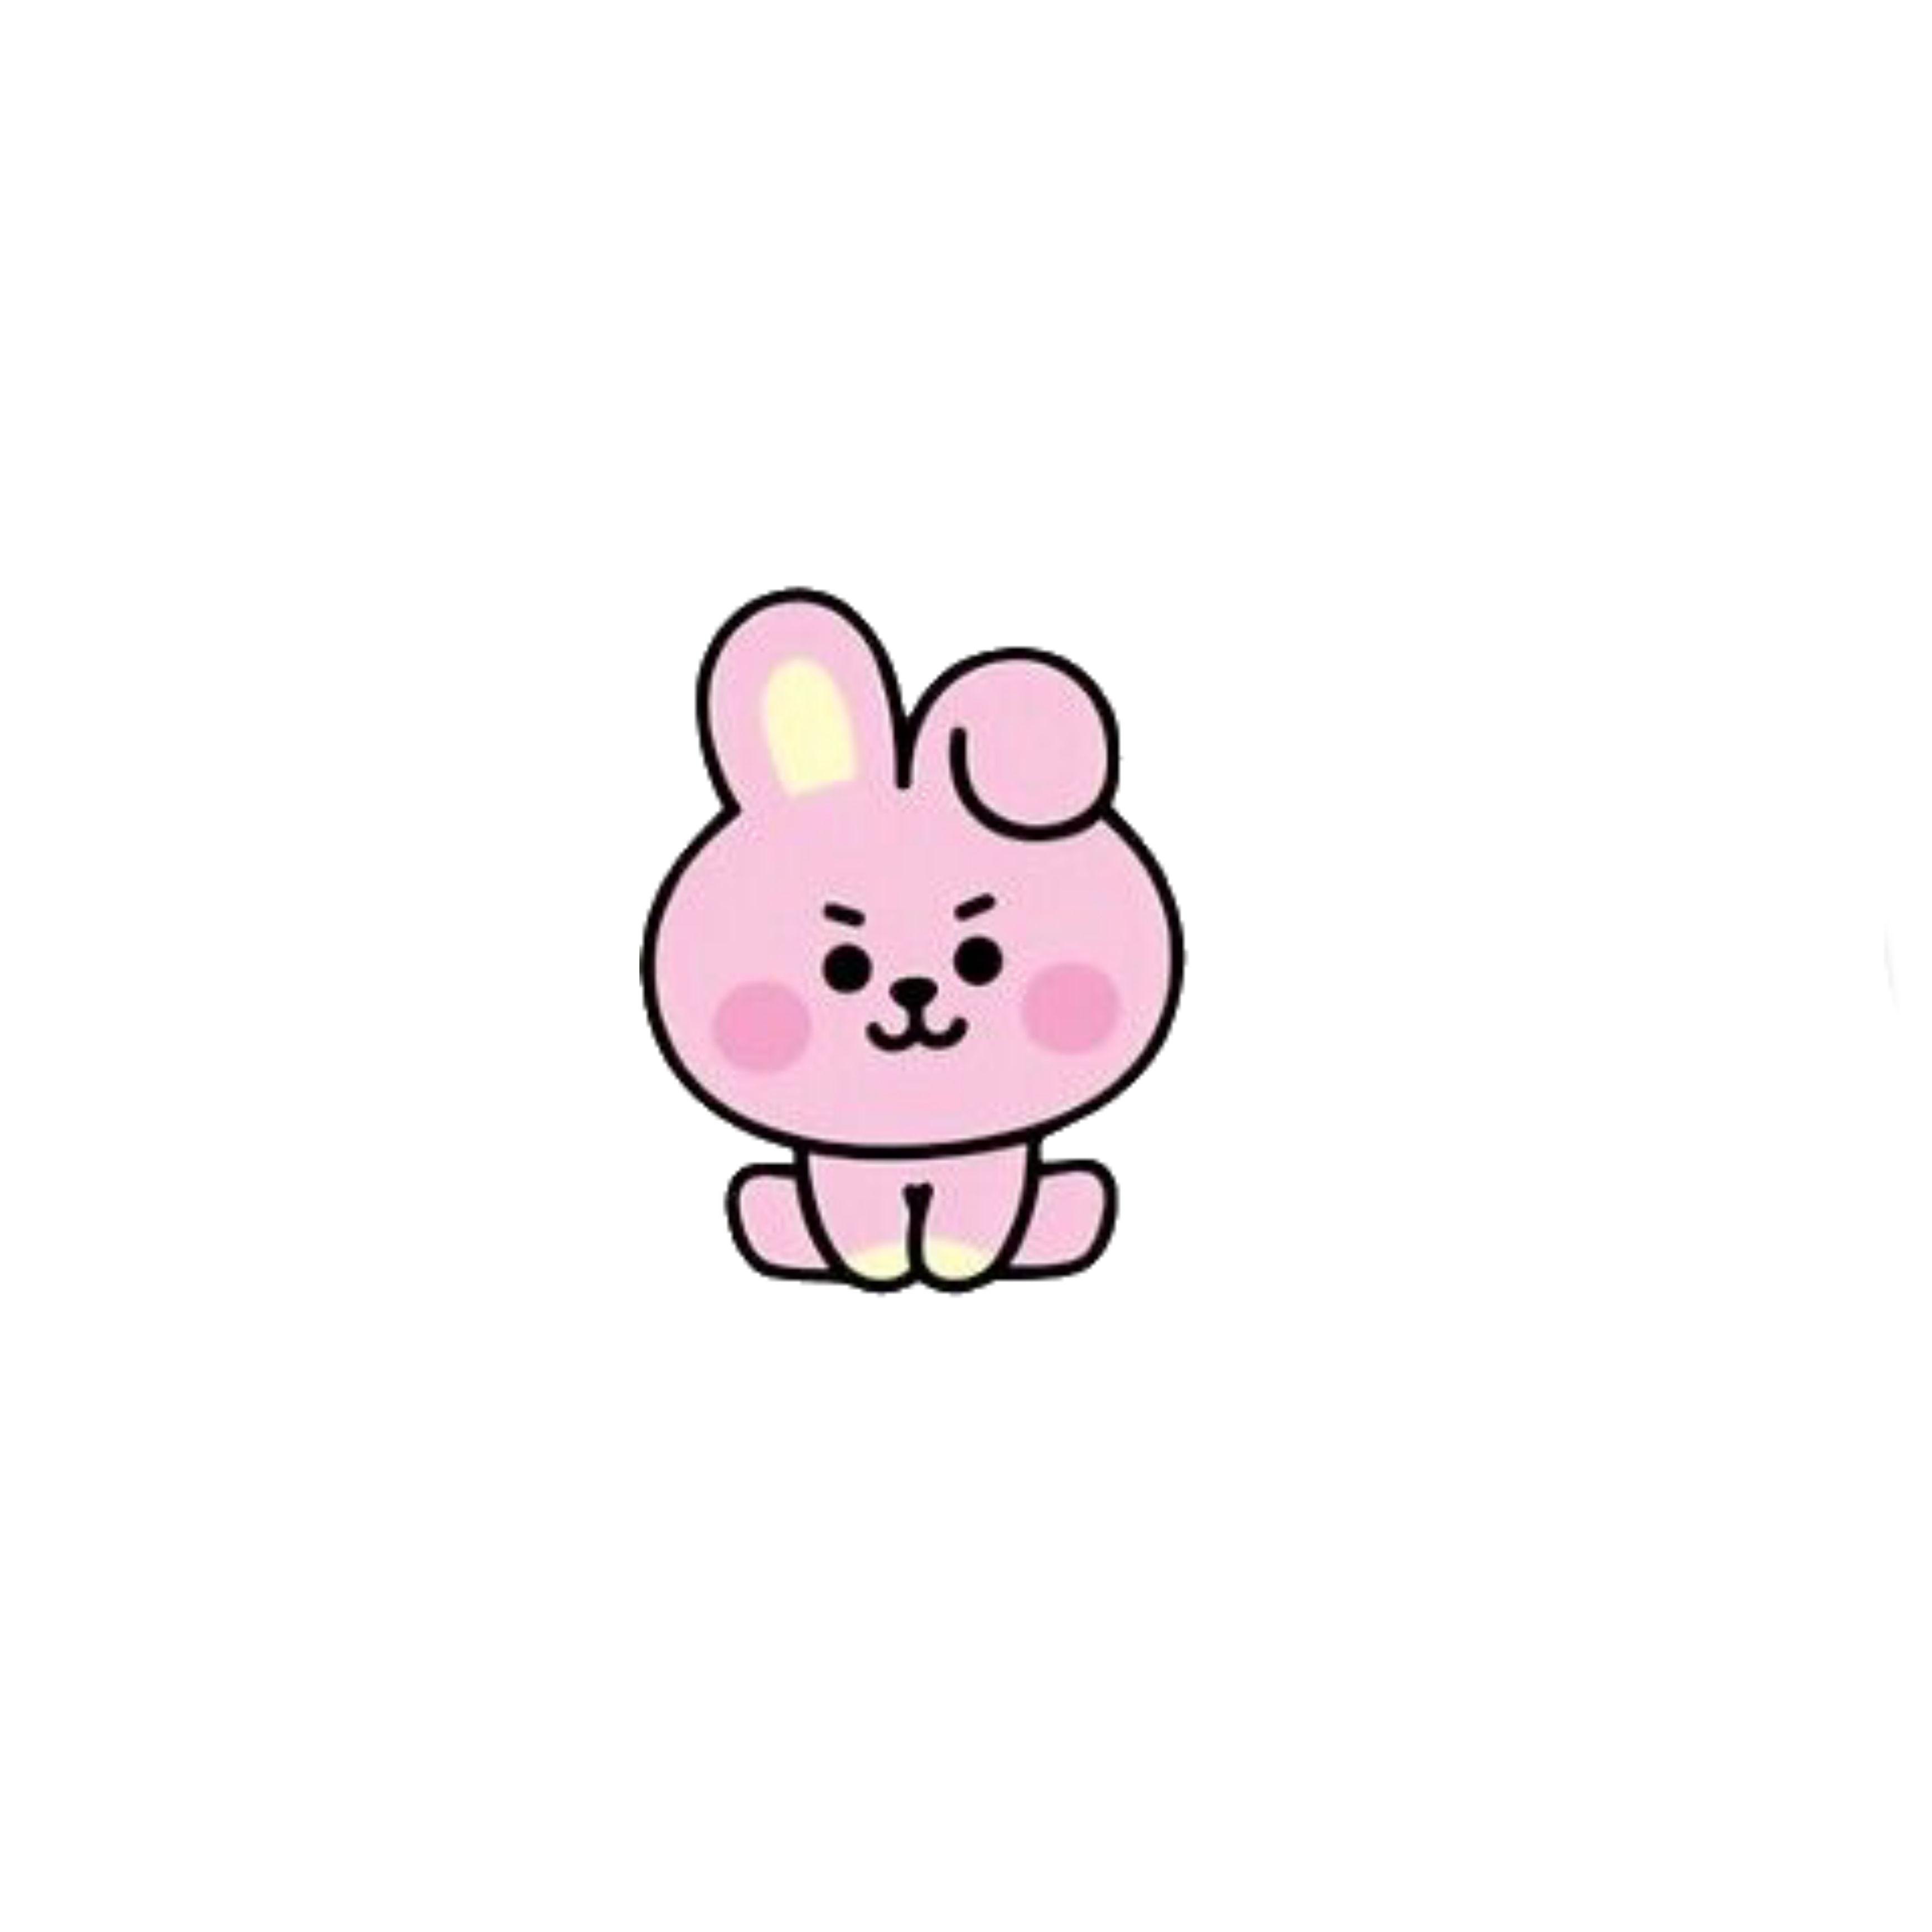 bt21 cooky pink cute baby freetoedit sticker by @tinymojis.